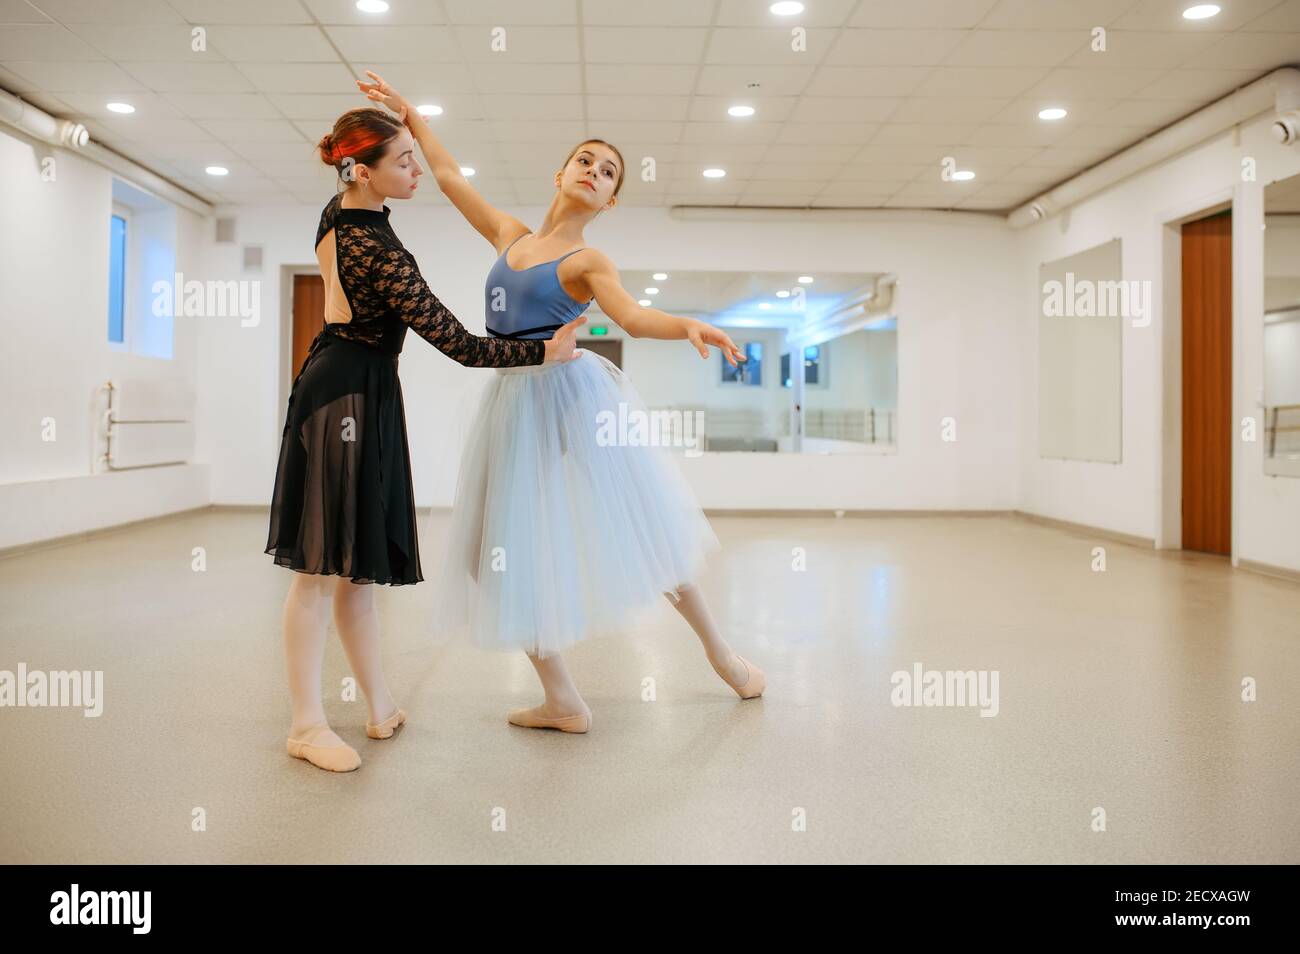 Choreographer works with young ballerina in class Stock Photo